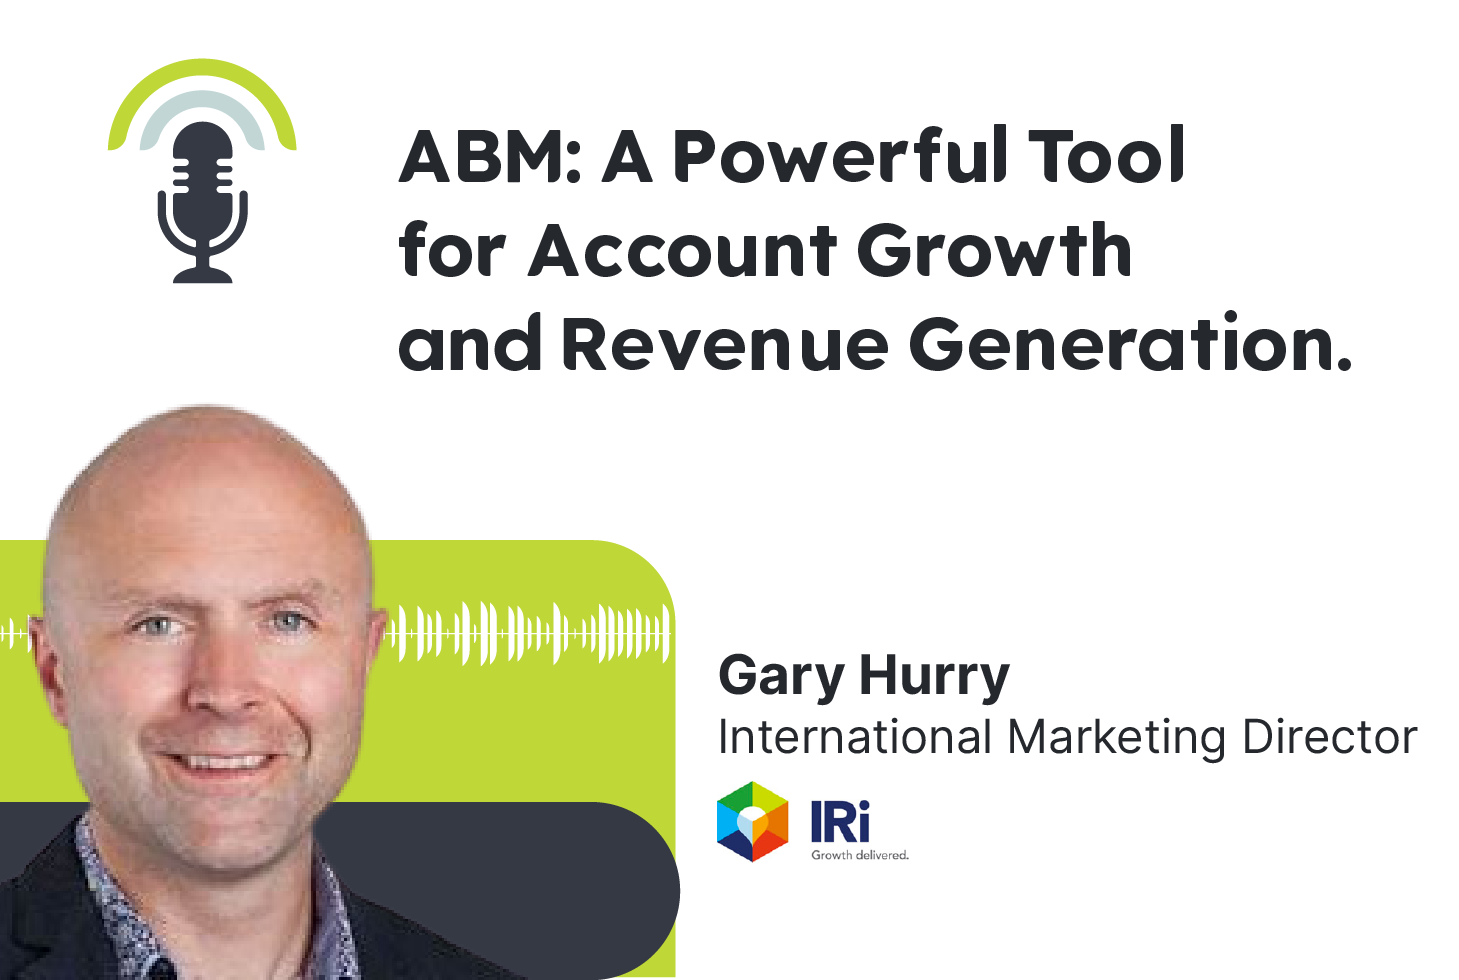 ABM: A Powerful Tool for Account Growth and Revenue Generation.